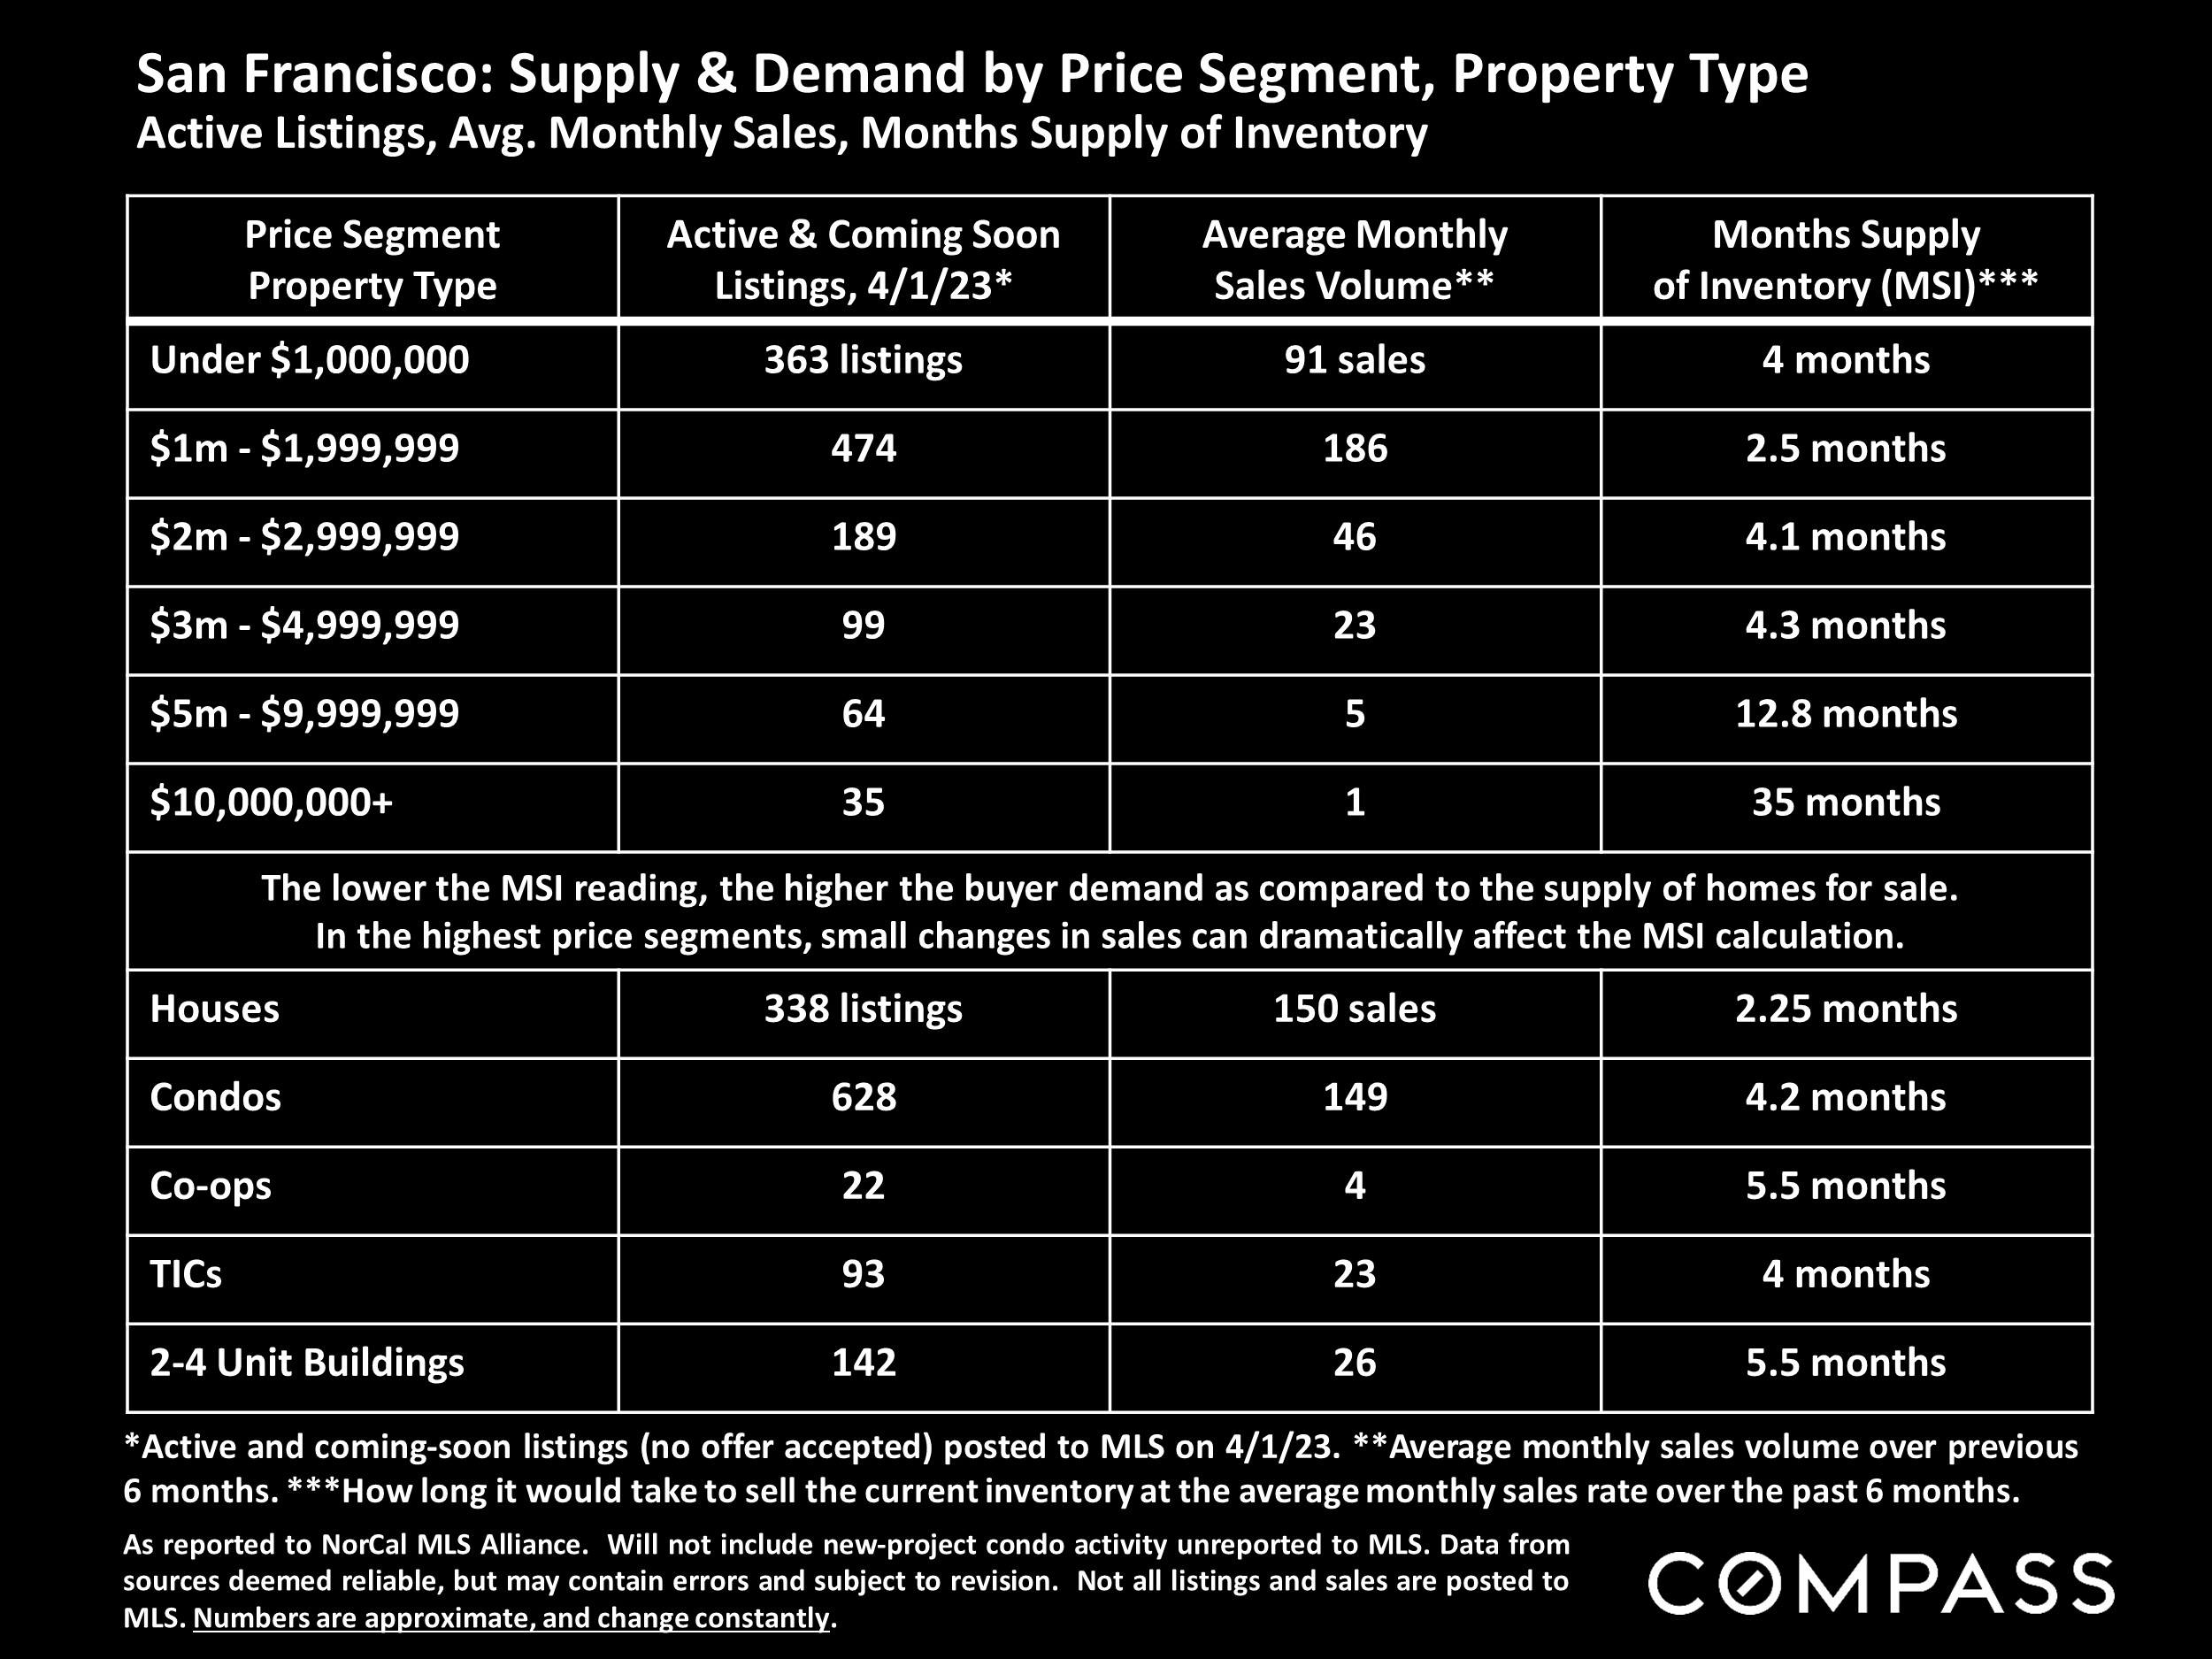 San Francisco: Supply & Demand by Price Segment, Property Type Active Listings, Avg. Monthly Sales, Months Supply of Inventory